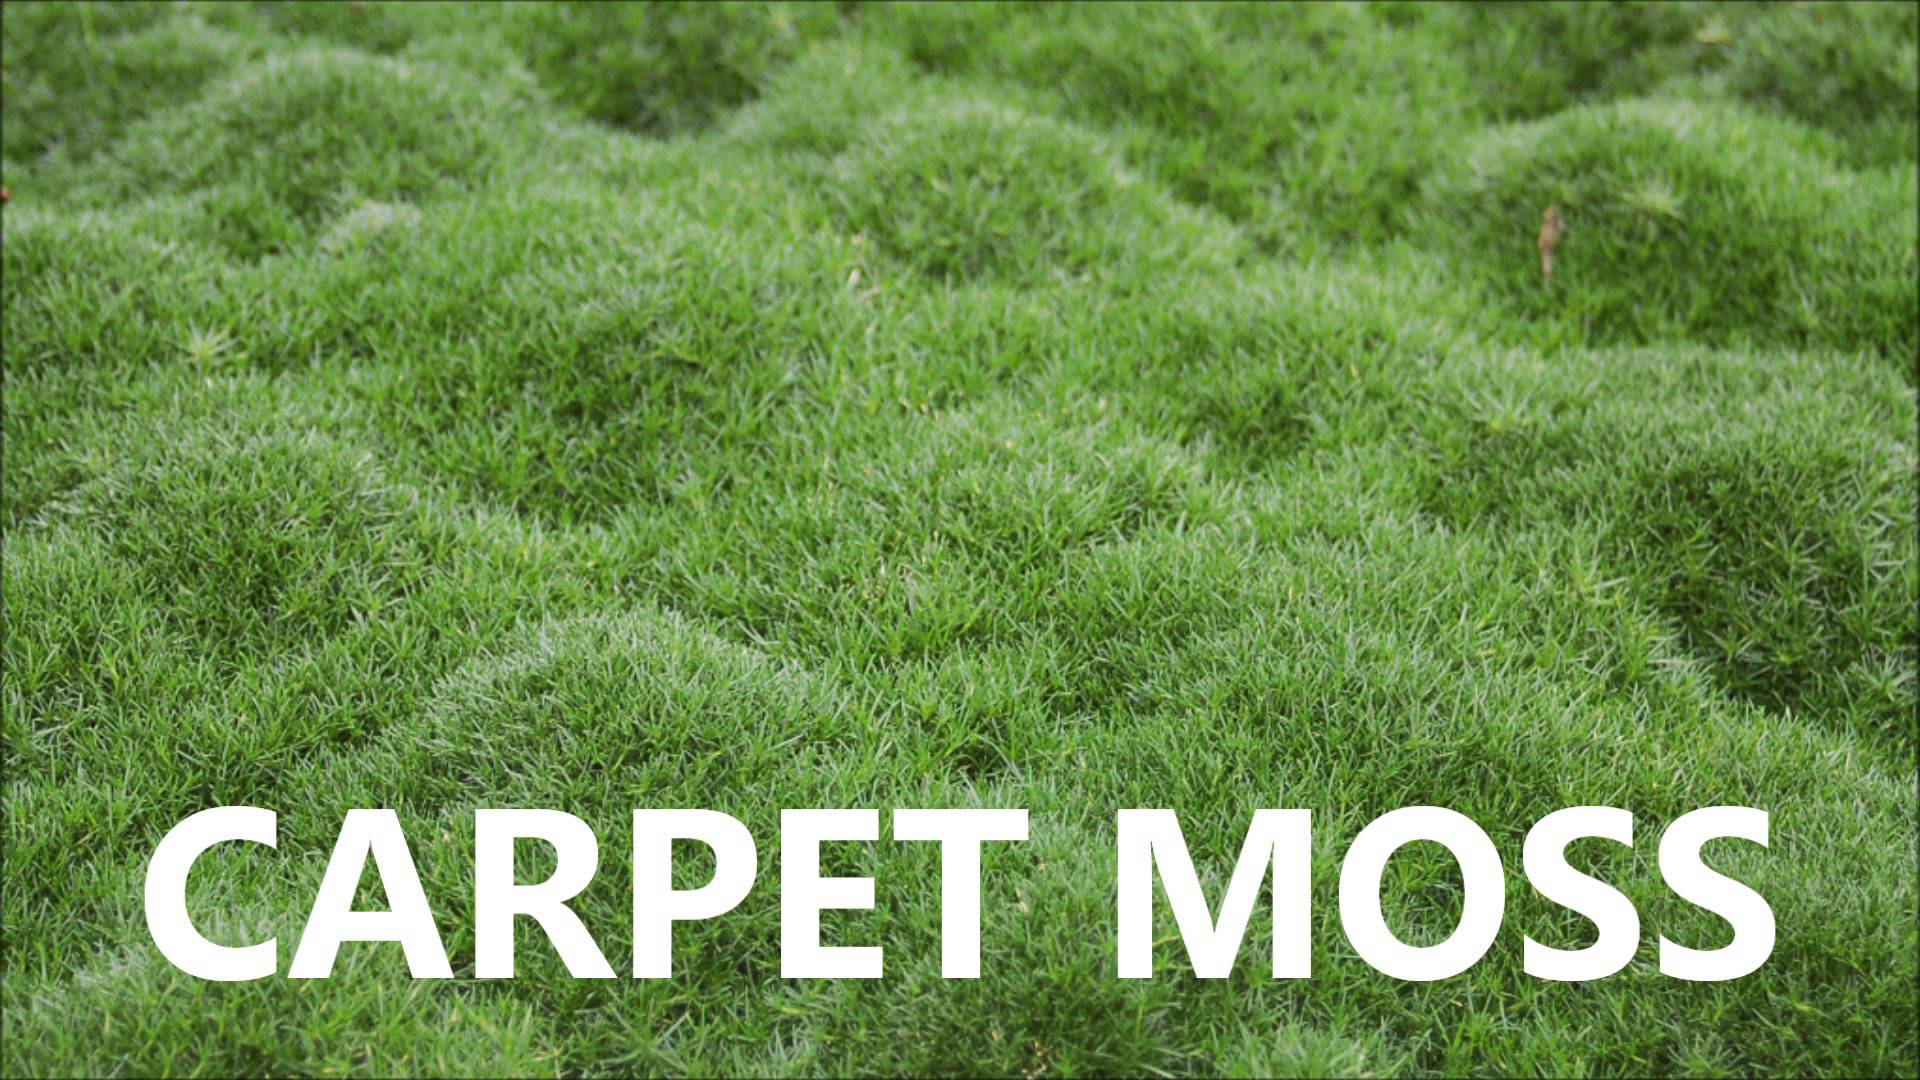 Live Carpet Moss For Sale - YouTube